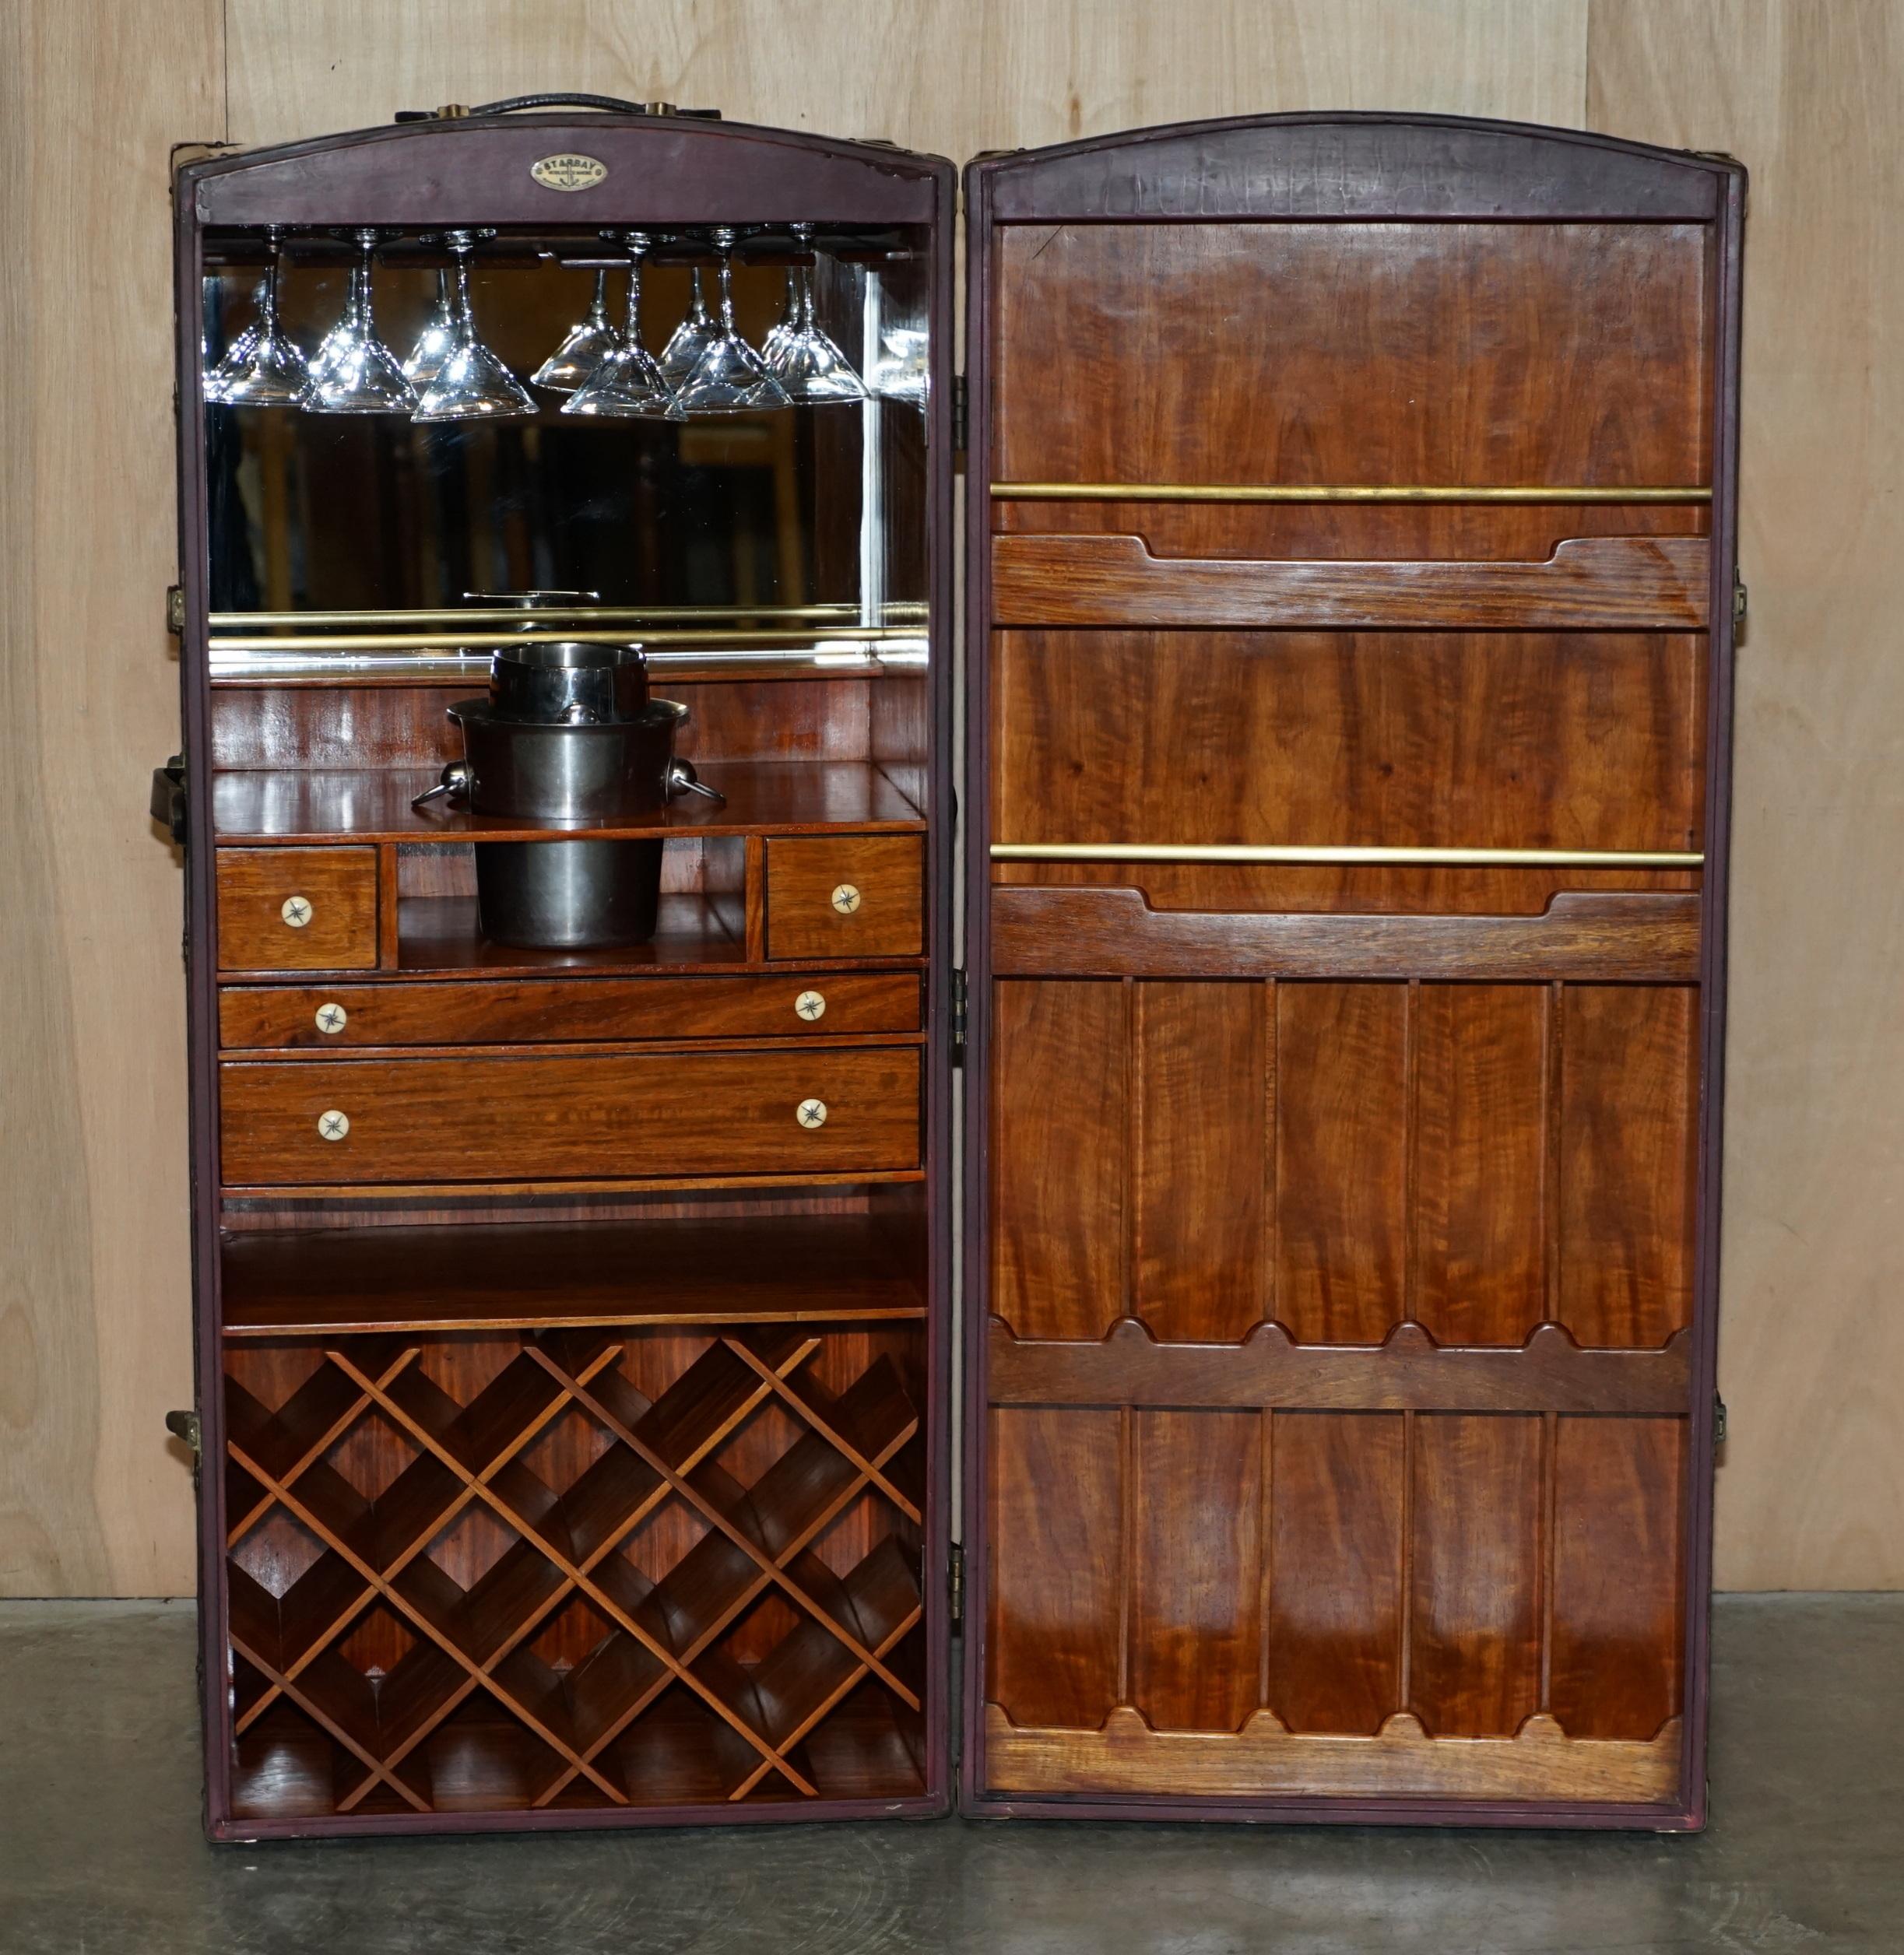 20th Century STARBAY SURCOUF LARGE STEAMER TRUNK AT HOME BAR WiTH GLASSES CHAMPAGNE BUCKET For Sale